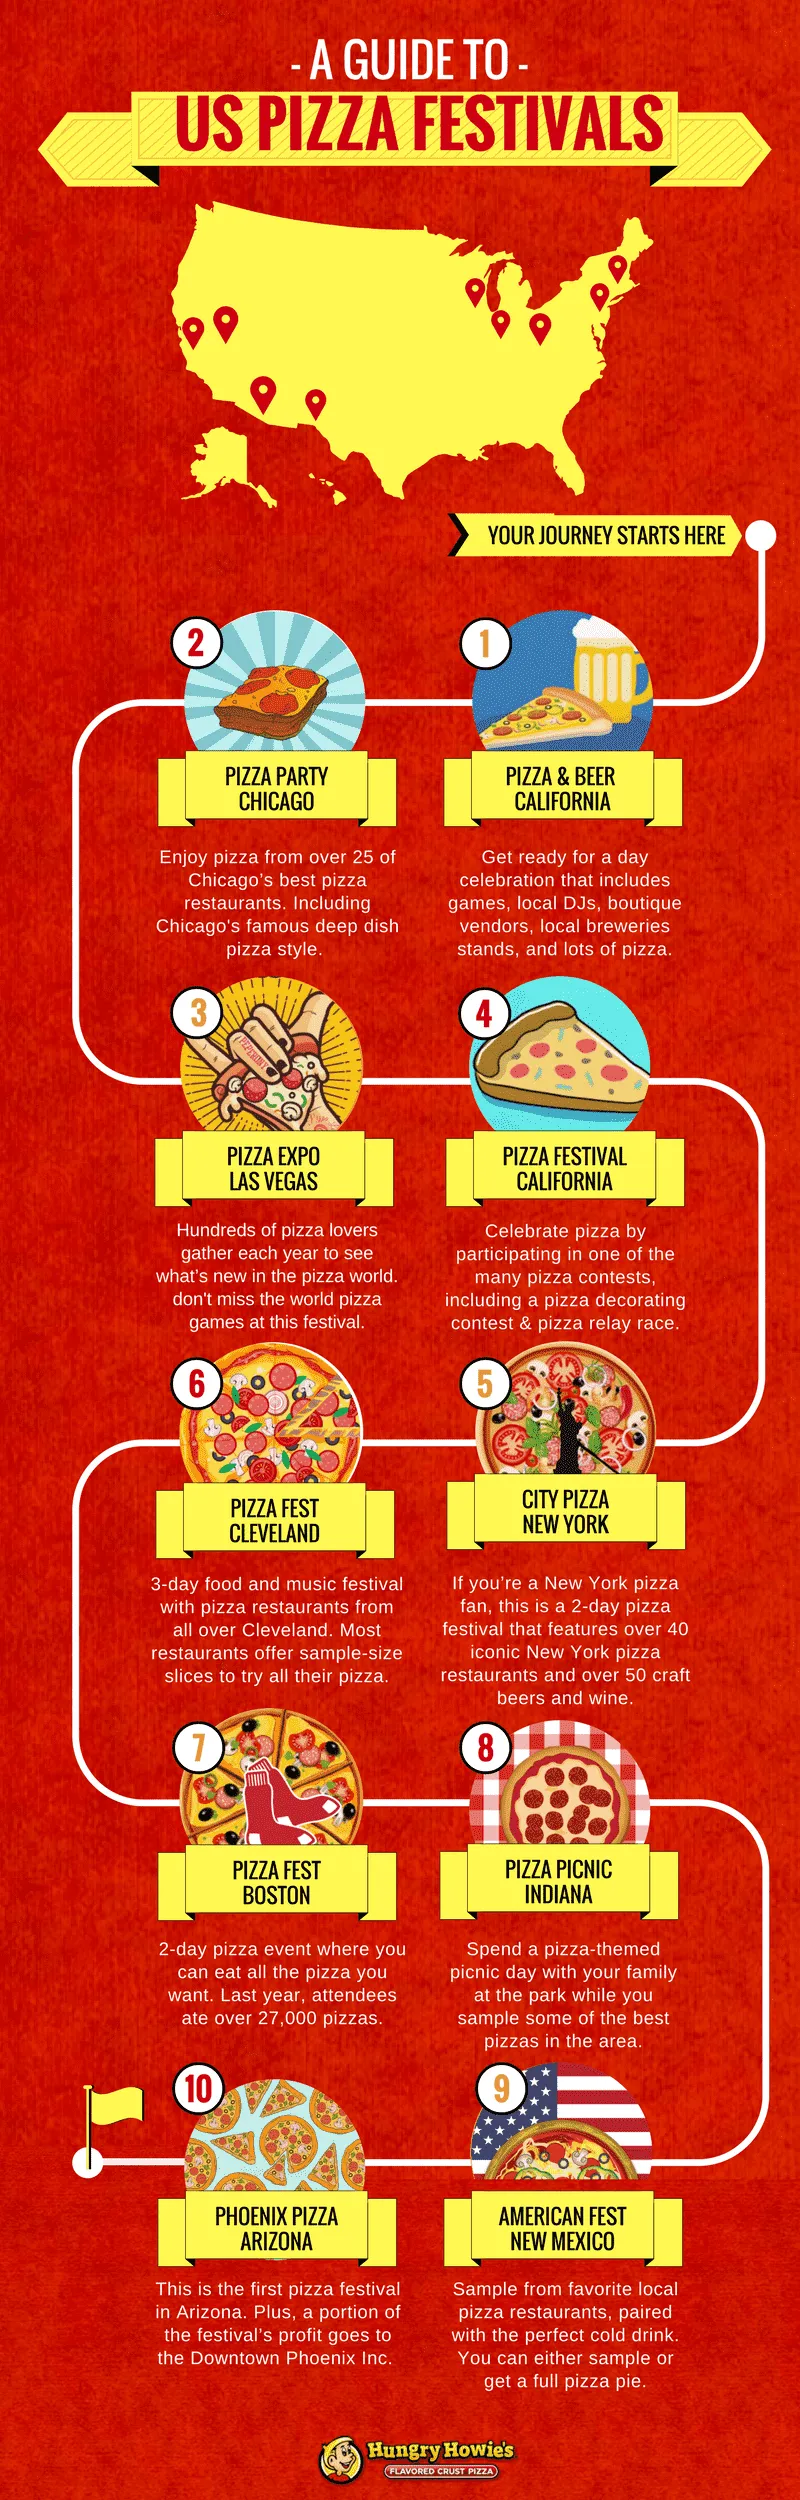 Best Pizza Festivals in the US